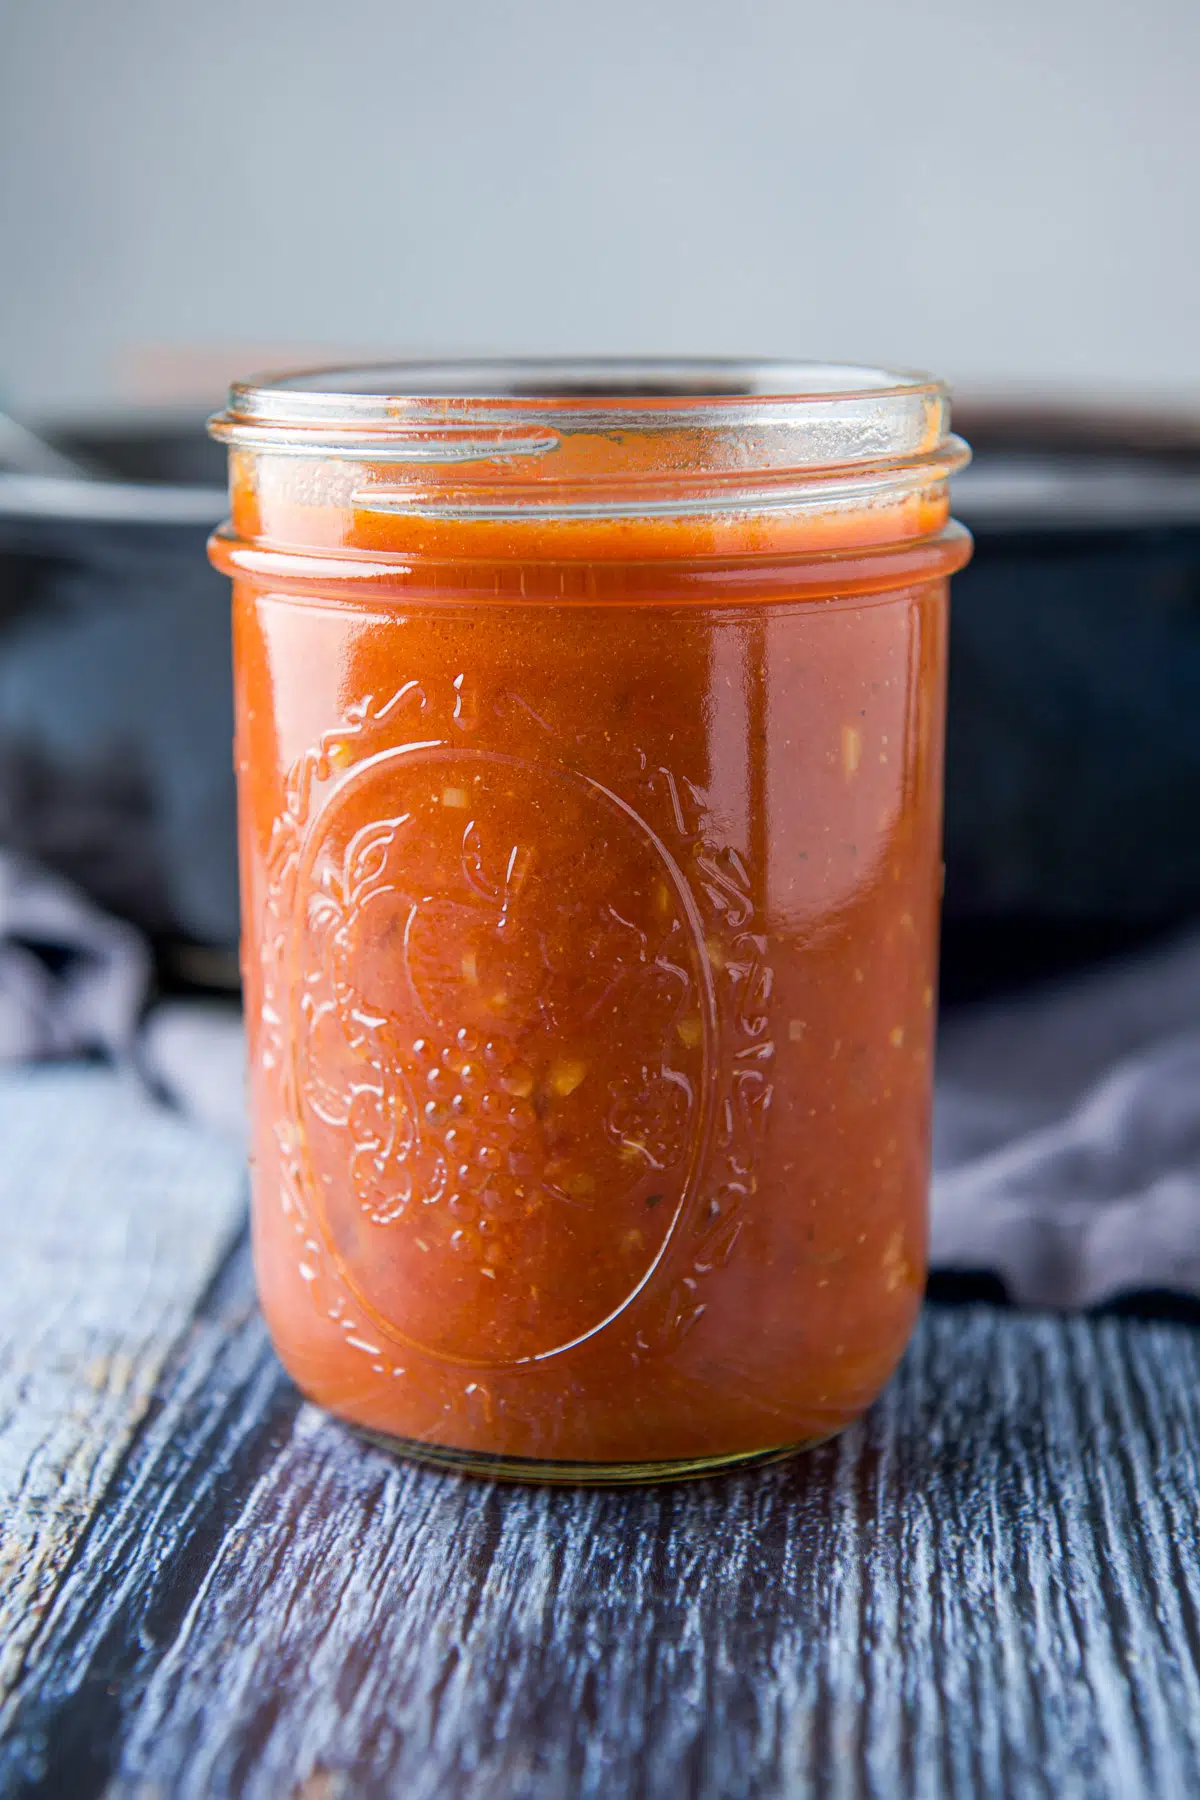 Vertical view of the pasta sauce in a jar with a pan in the background